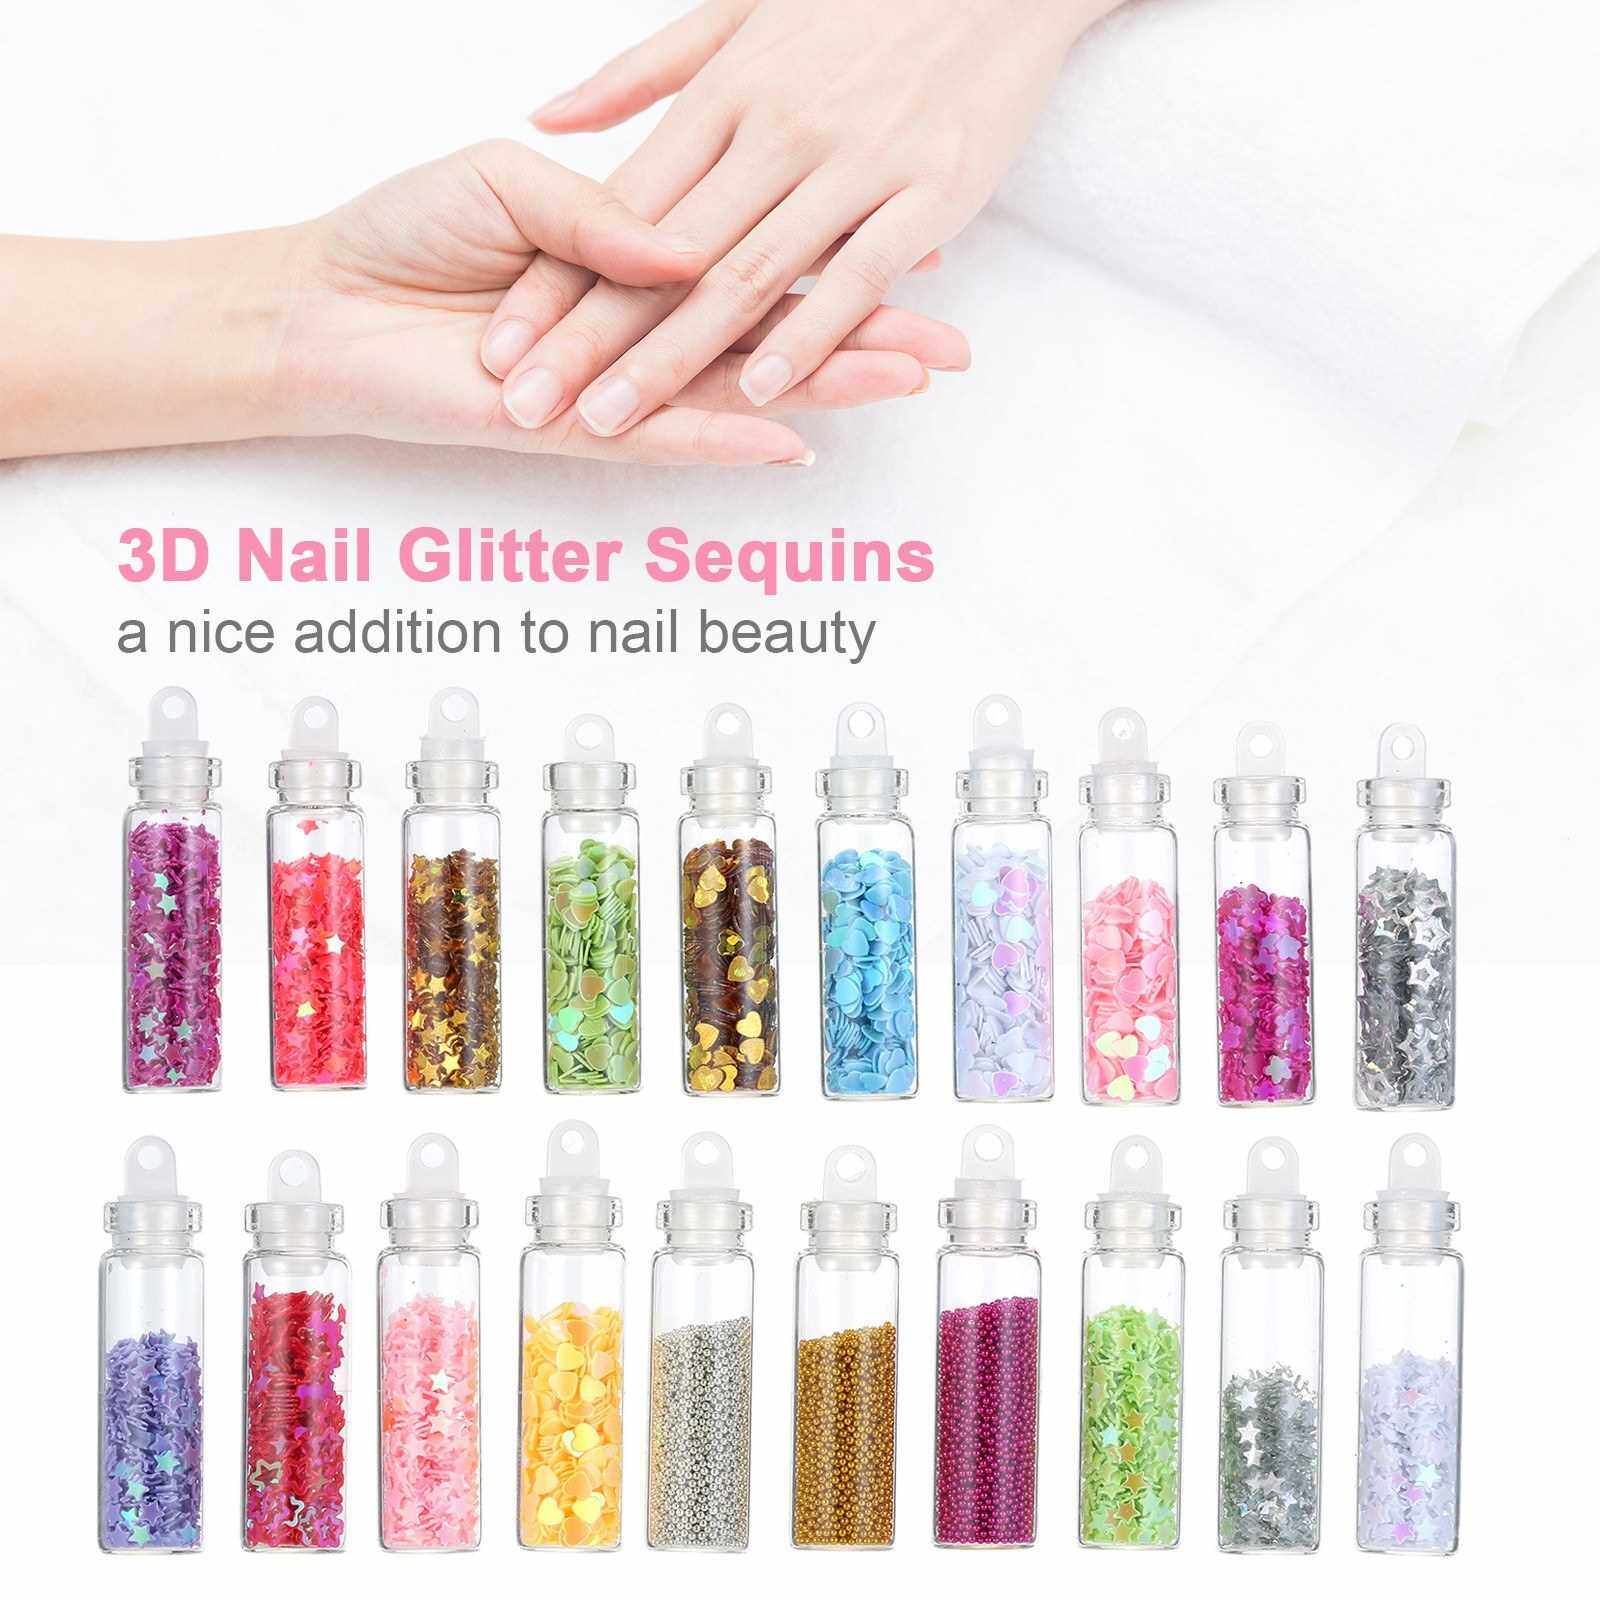 3D Nail Glitter Sequins Nail Glitter Flakes Set Acrylic Nail Sparkle Glitter Stickers Decals for Christmas Nail Art Decoration Mixed Colors & Shapes 20 Bottles (Standard)